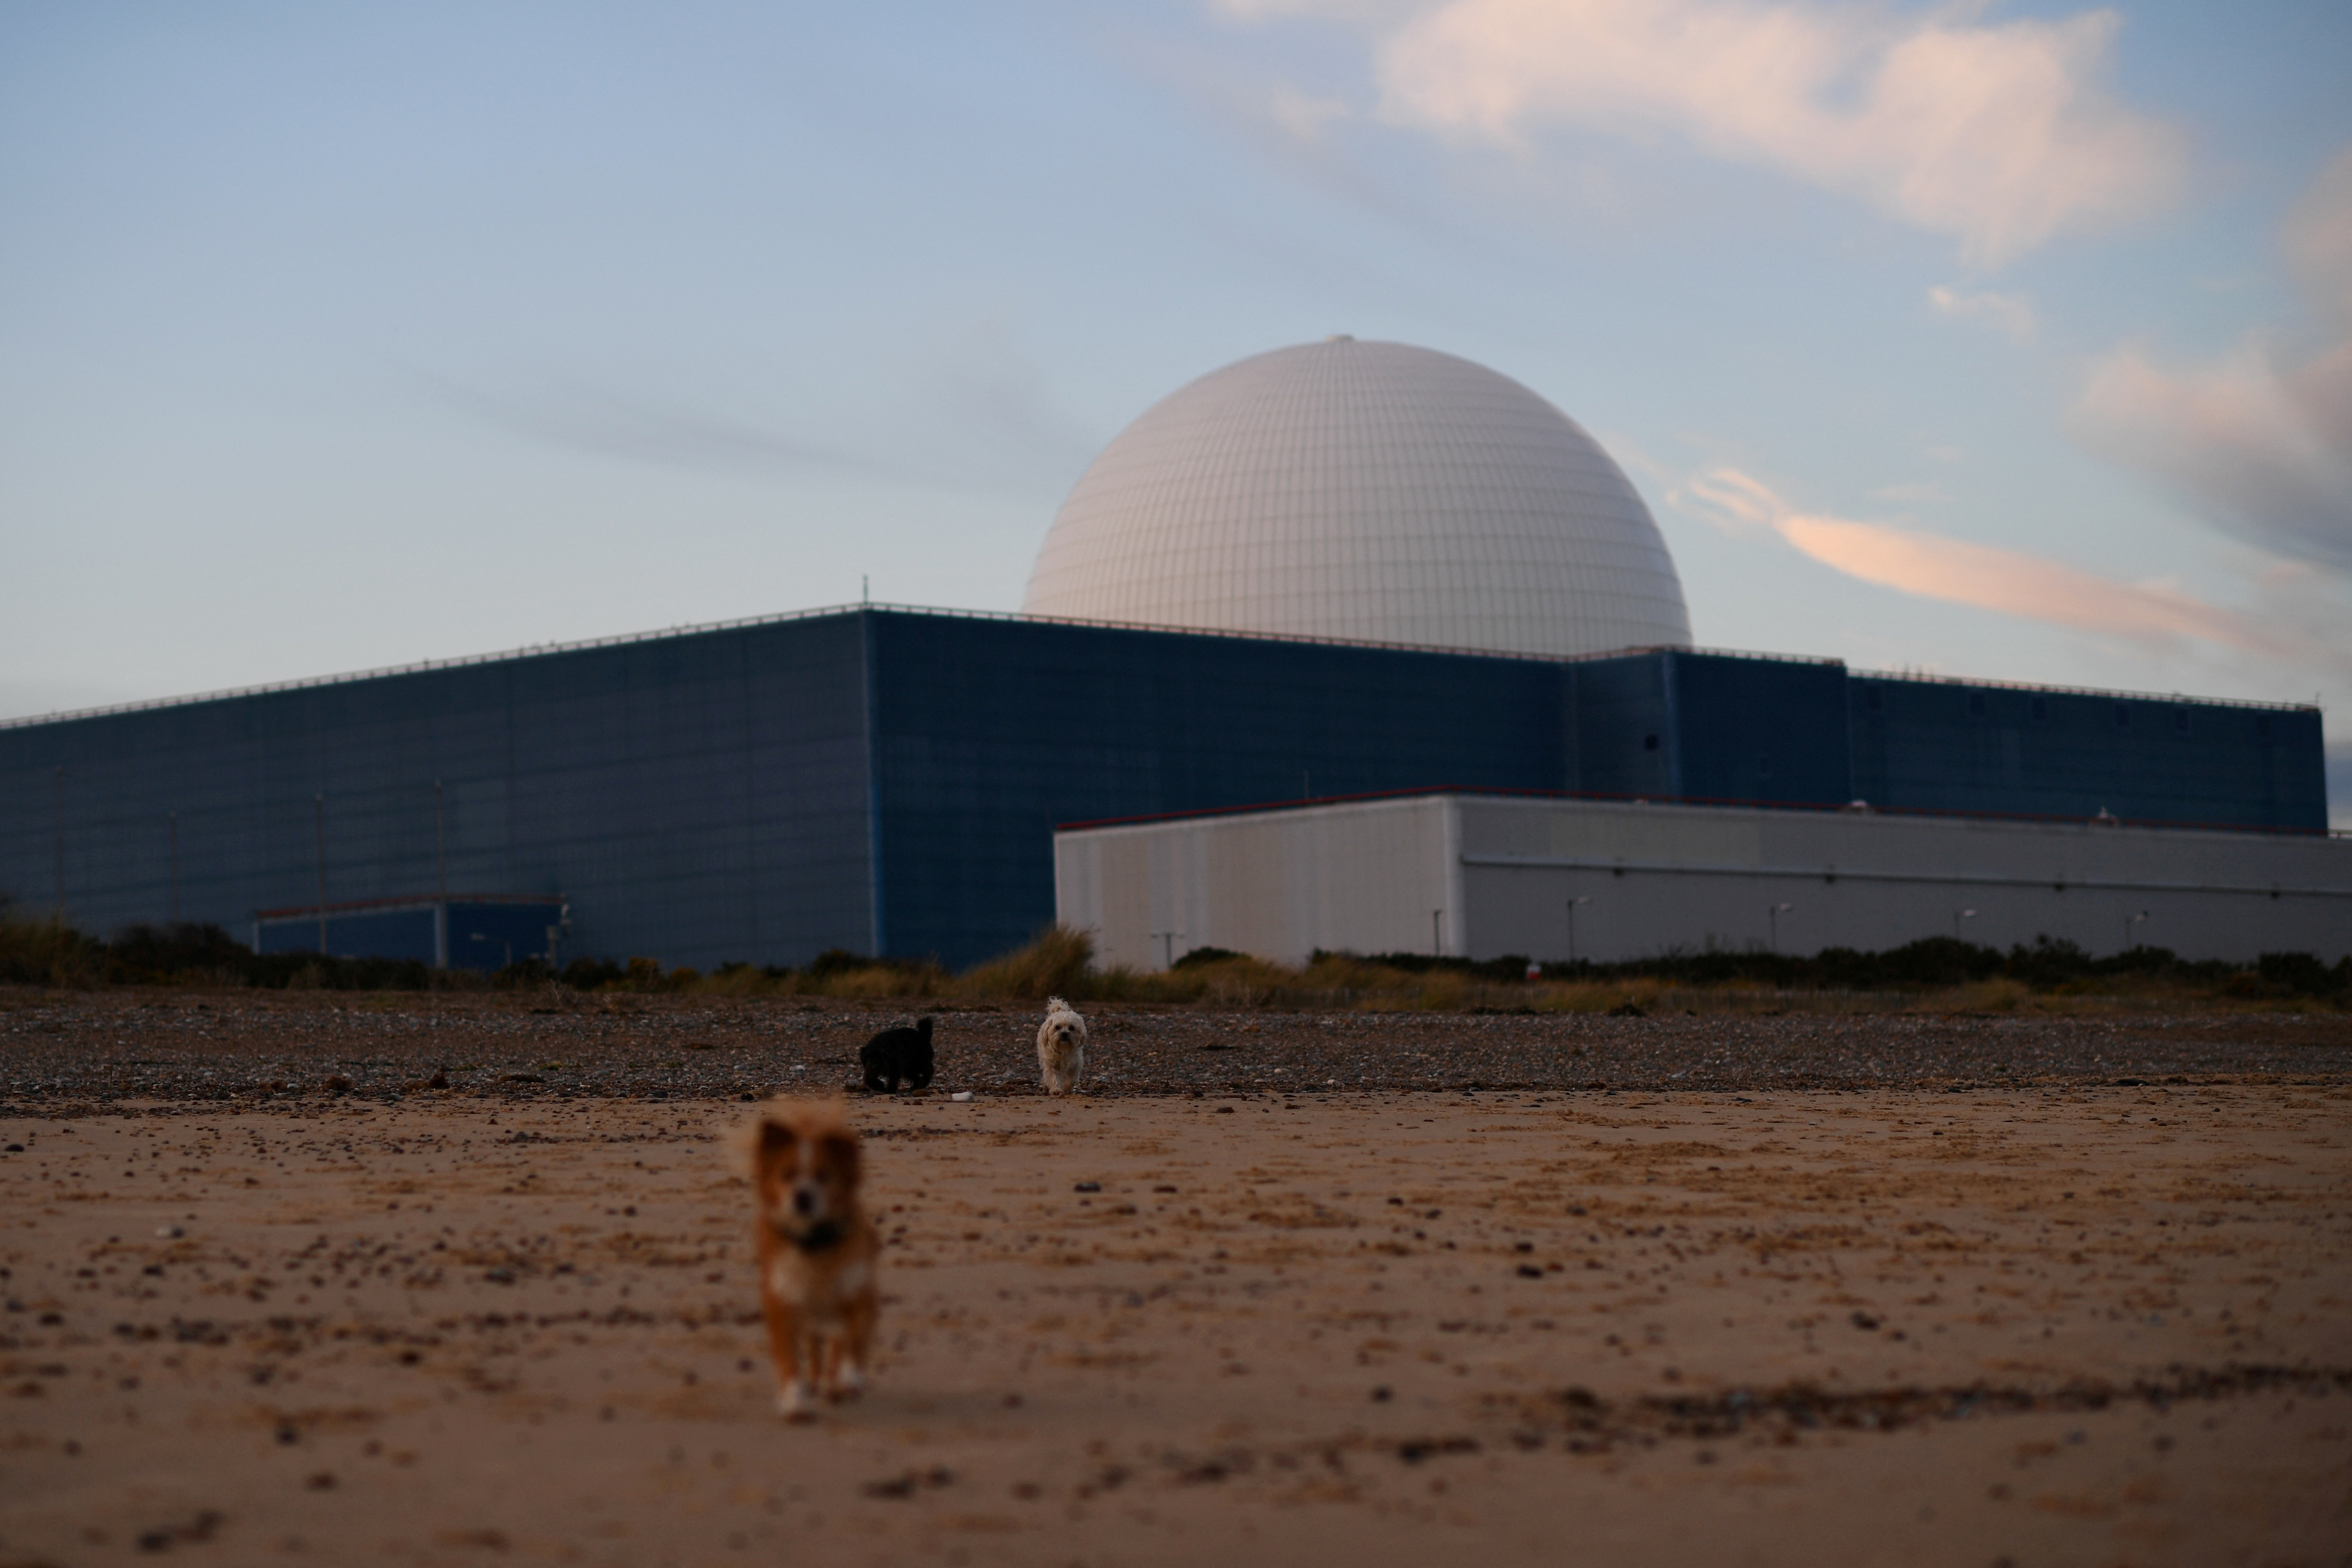 Dogs walk on the beach near Sizewell Nuclear Power Station as the sun sets on Sizewell in Suffolk, Britain